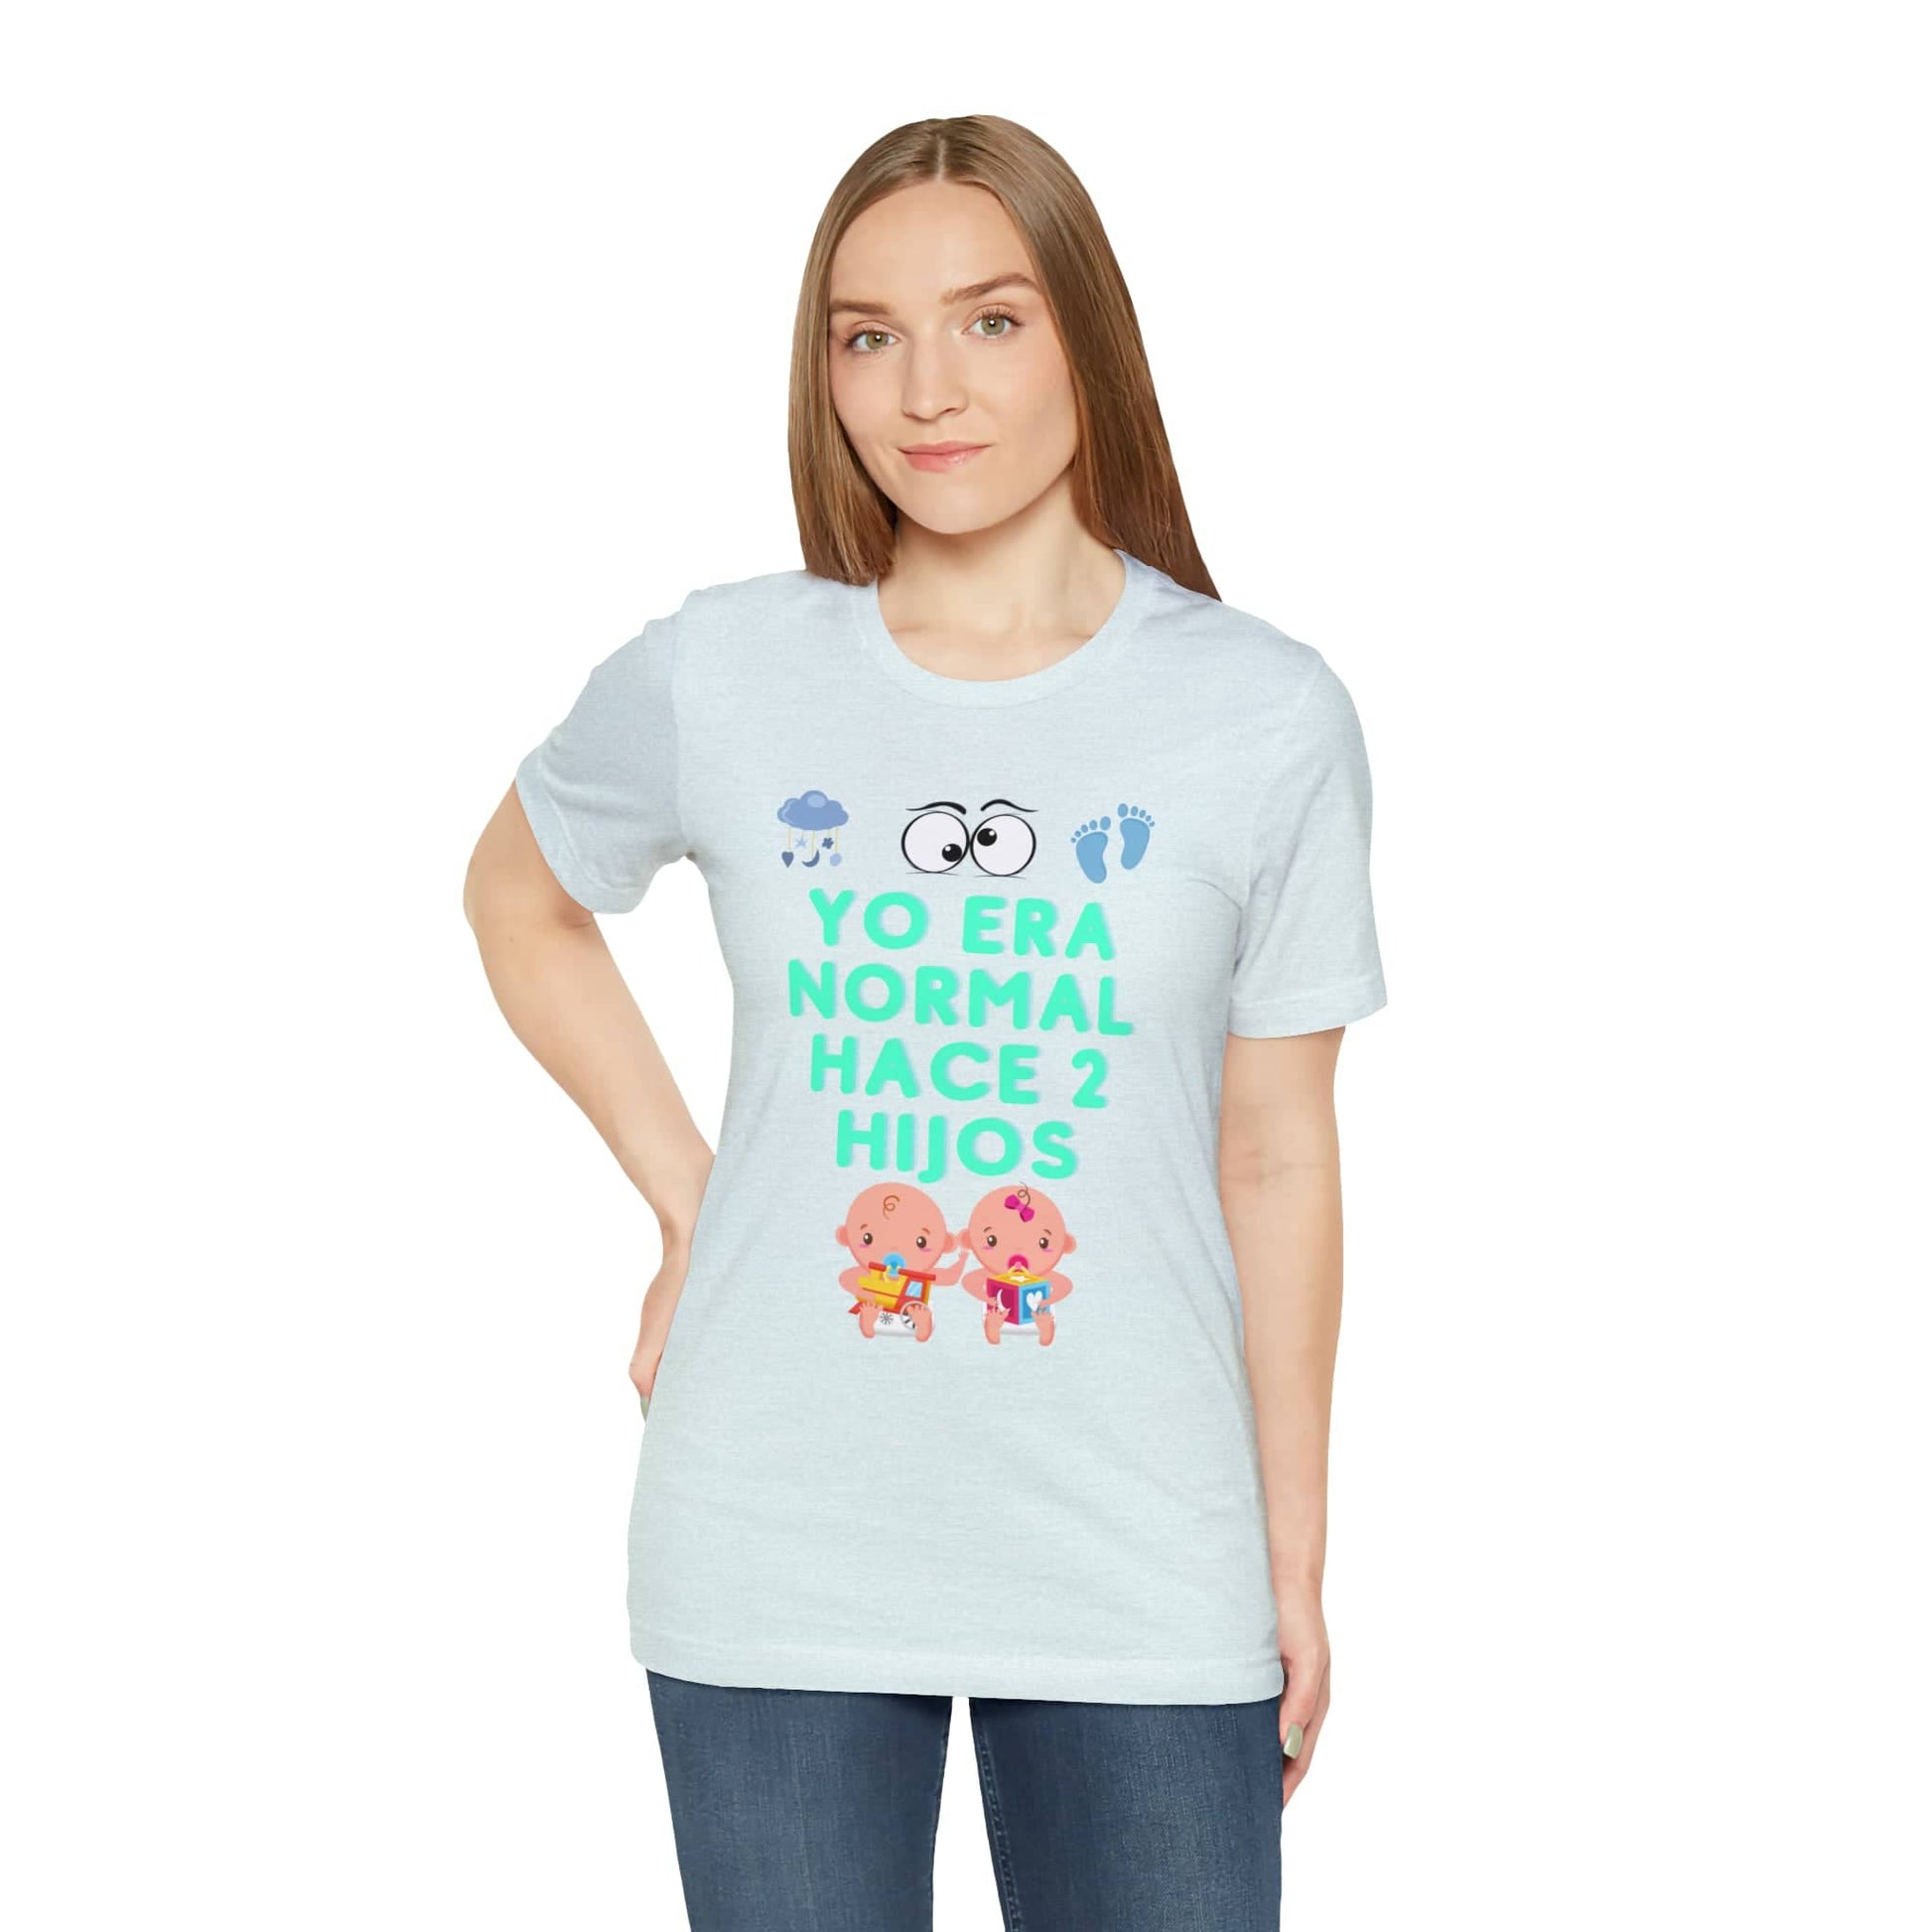 Yo Era Normal Hace 2 Hijos: The Perfect Unisex Tee for the Eternally Busy Parent T-Shirt Bigger Than Life Heather Ice Blue S 